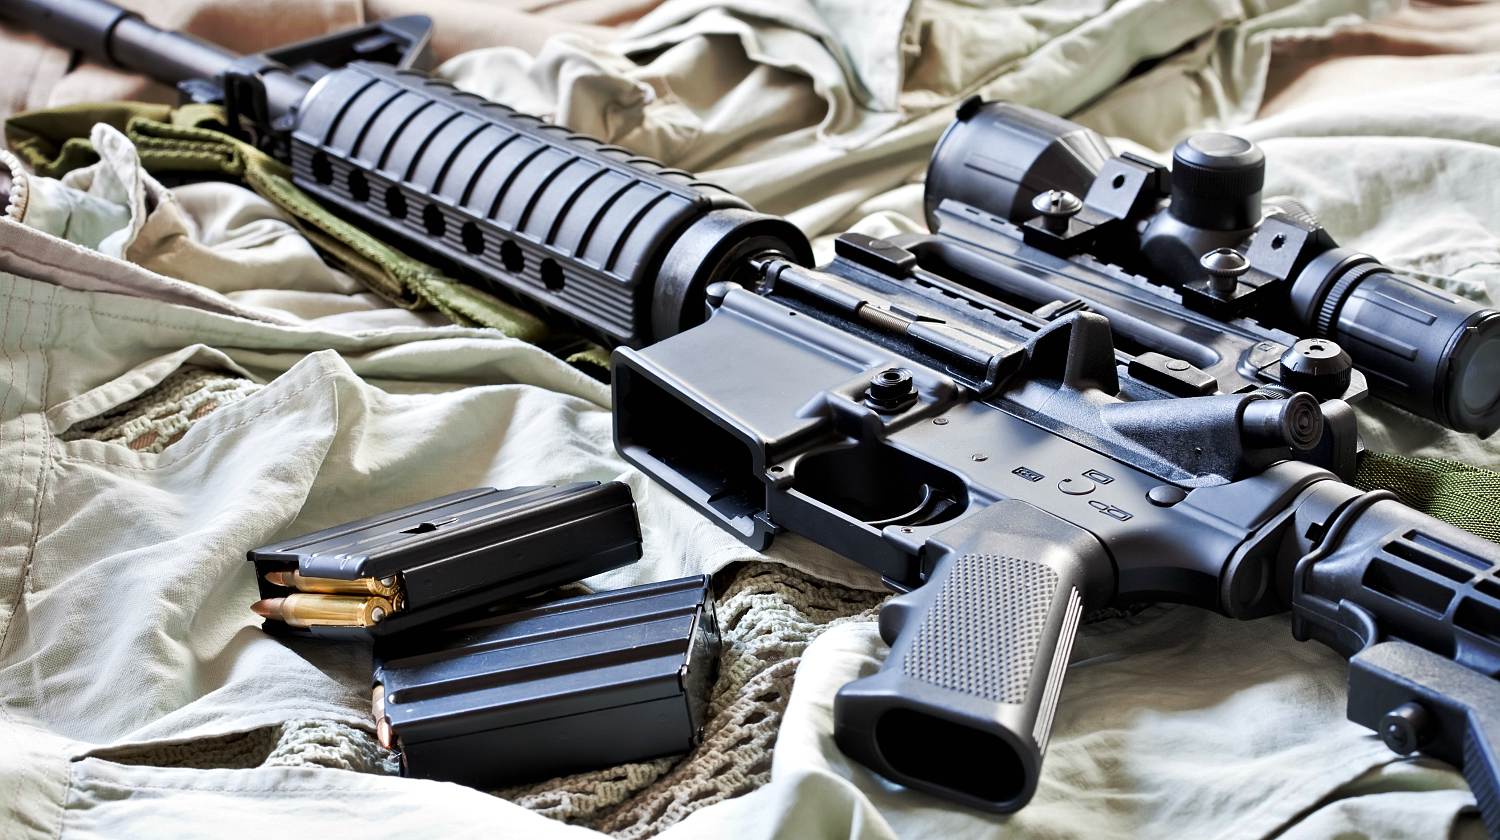 Close-up of AR-15 rifle and magazines with ammo | AR-15 Myths: The Weapon Of Mass Destruction And Assaulting Stuff | Featured